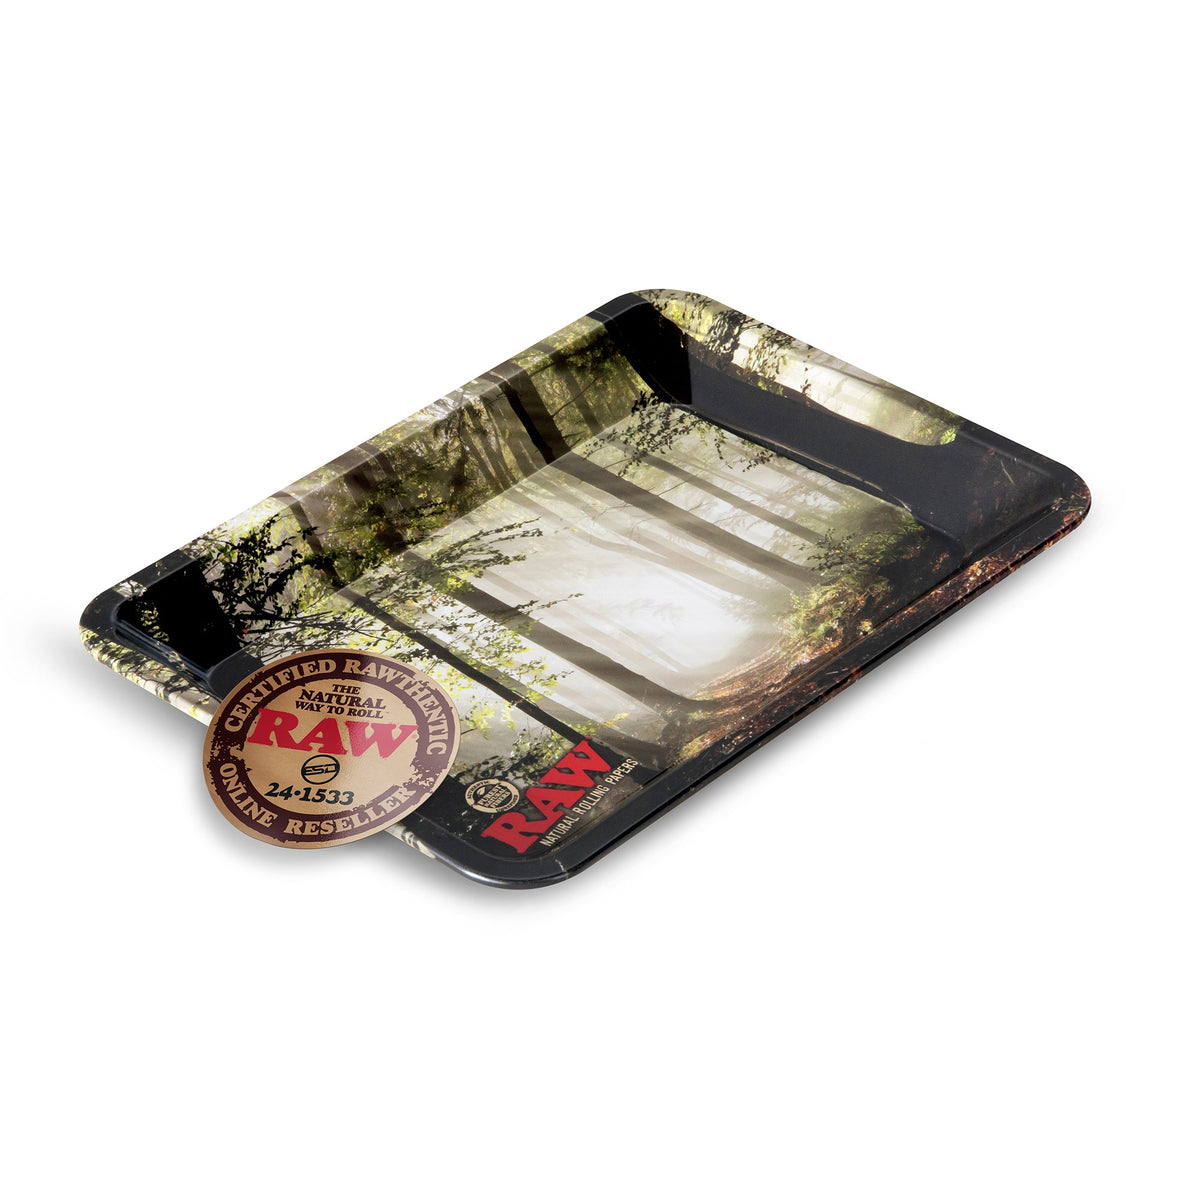 RAW Smokey Forest Rolling Trays Rolling Trays WAR00105-MUSA01 esd-official